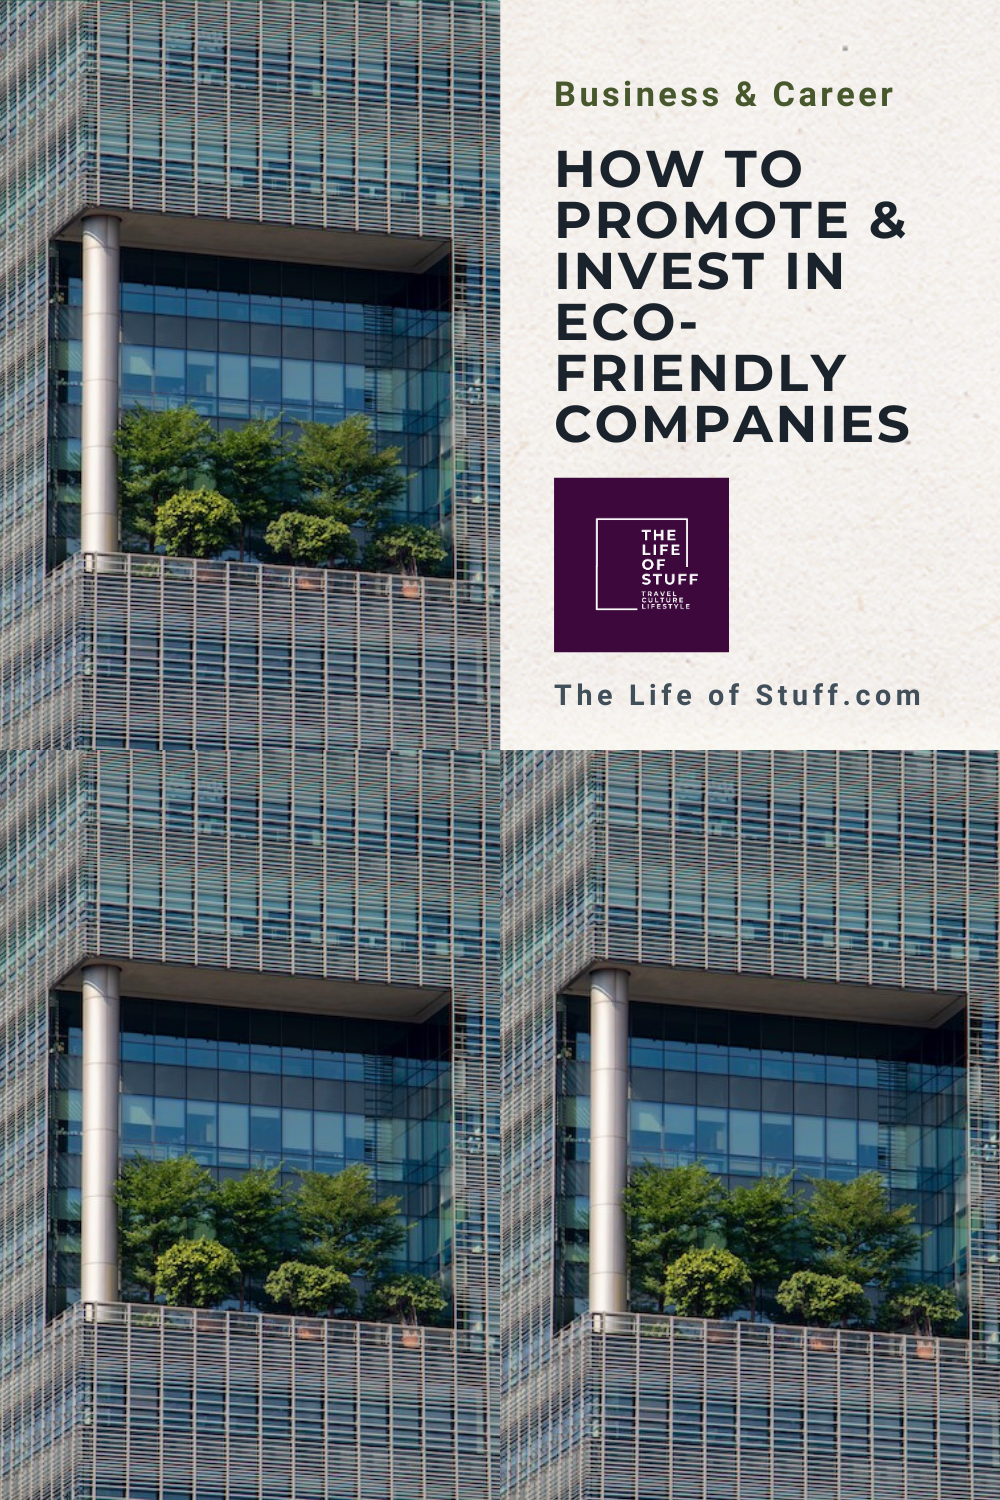 How to Promote & Invest in Eco-Friendly Companies - The Life of Stuff